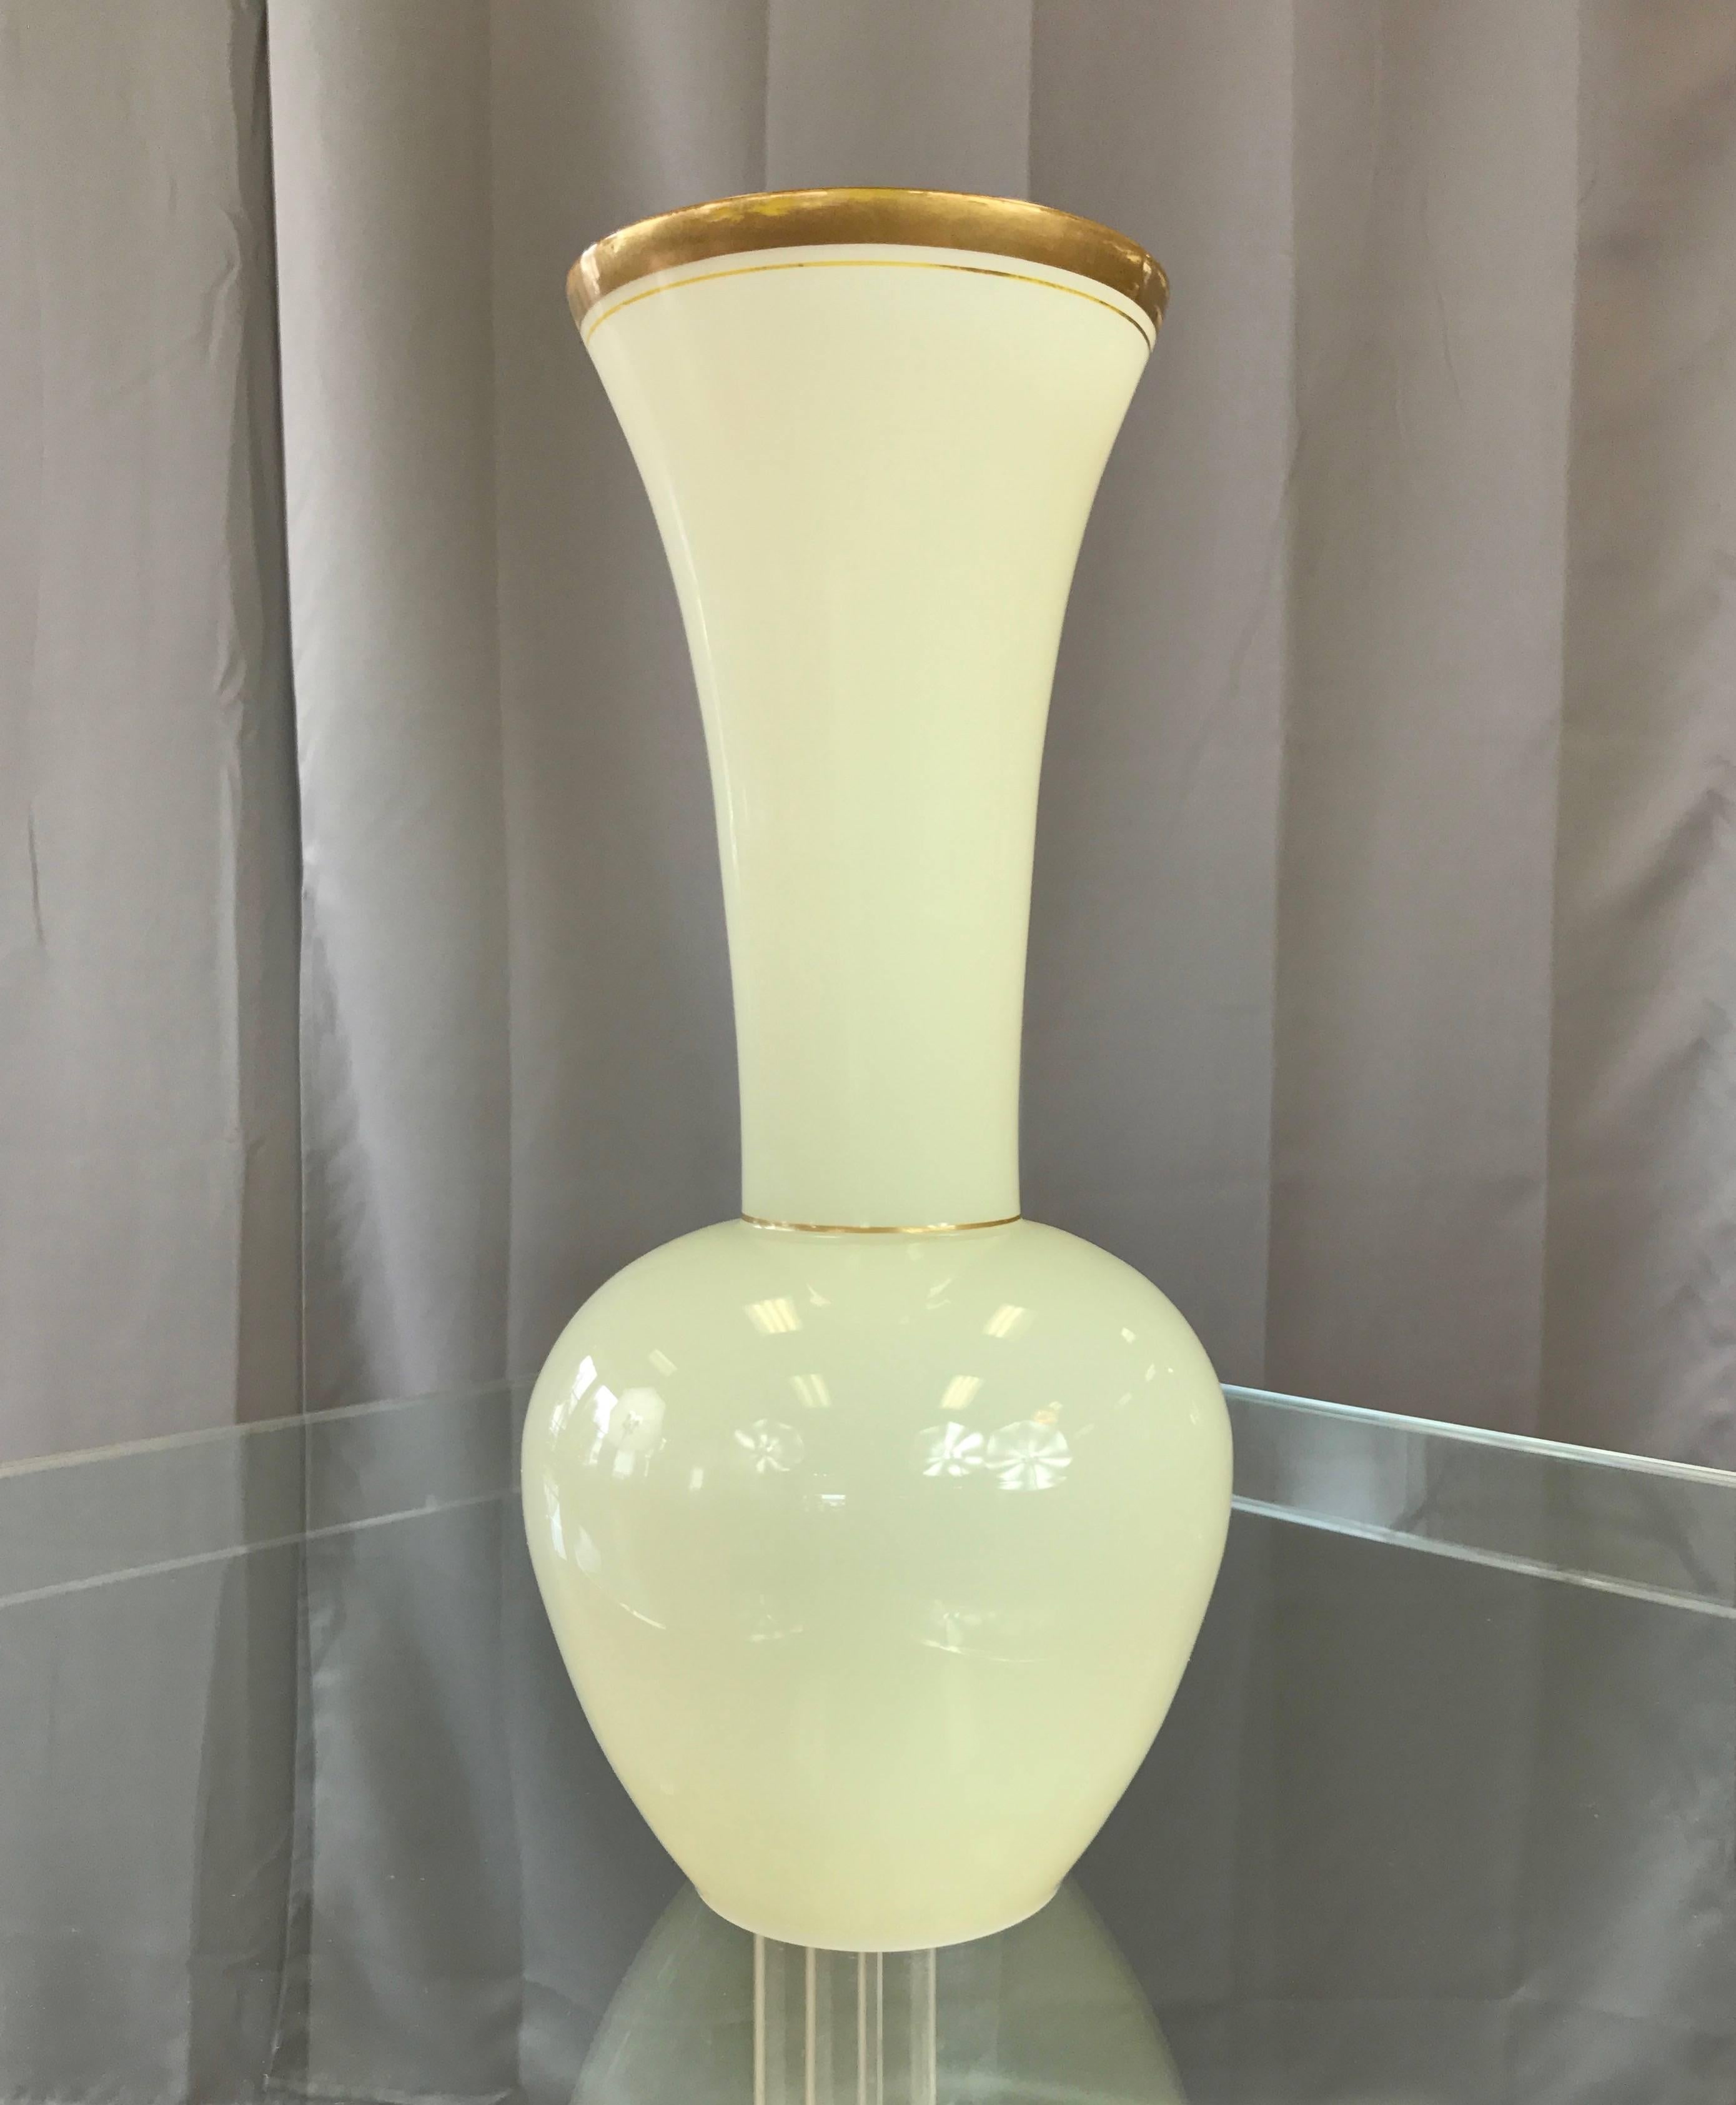 A gorgeous pale green opaline tall trumpet vase by Murano glass studio Cenedese.

Large handblown body has a lovely, jade-like luminosity. Hand-painted gilt band and pinstripe at mouth, with a second pinstripe at waist. Polished bottom. Unsigned.